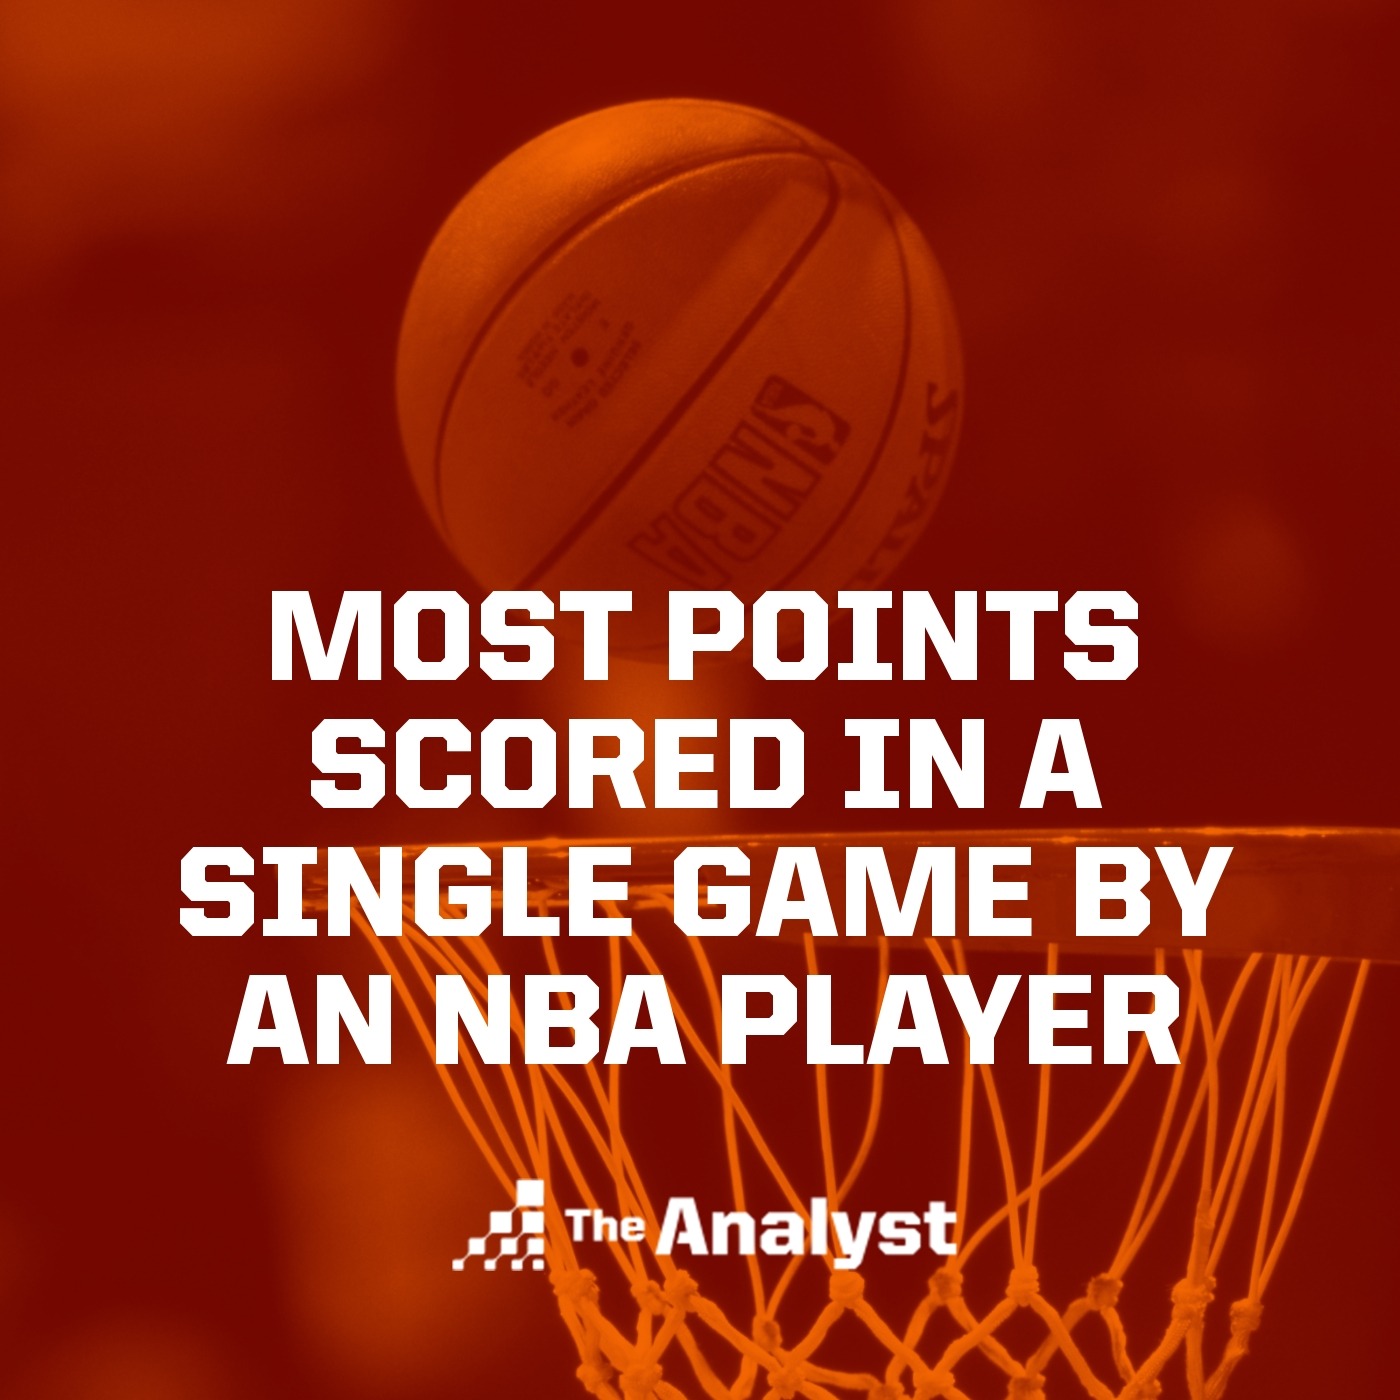 The Most Points Scored in a Single Game by an NBA Player